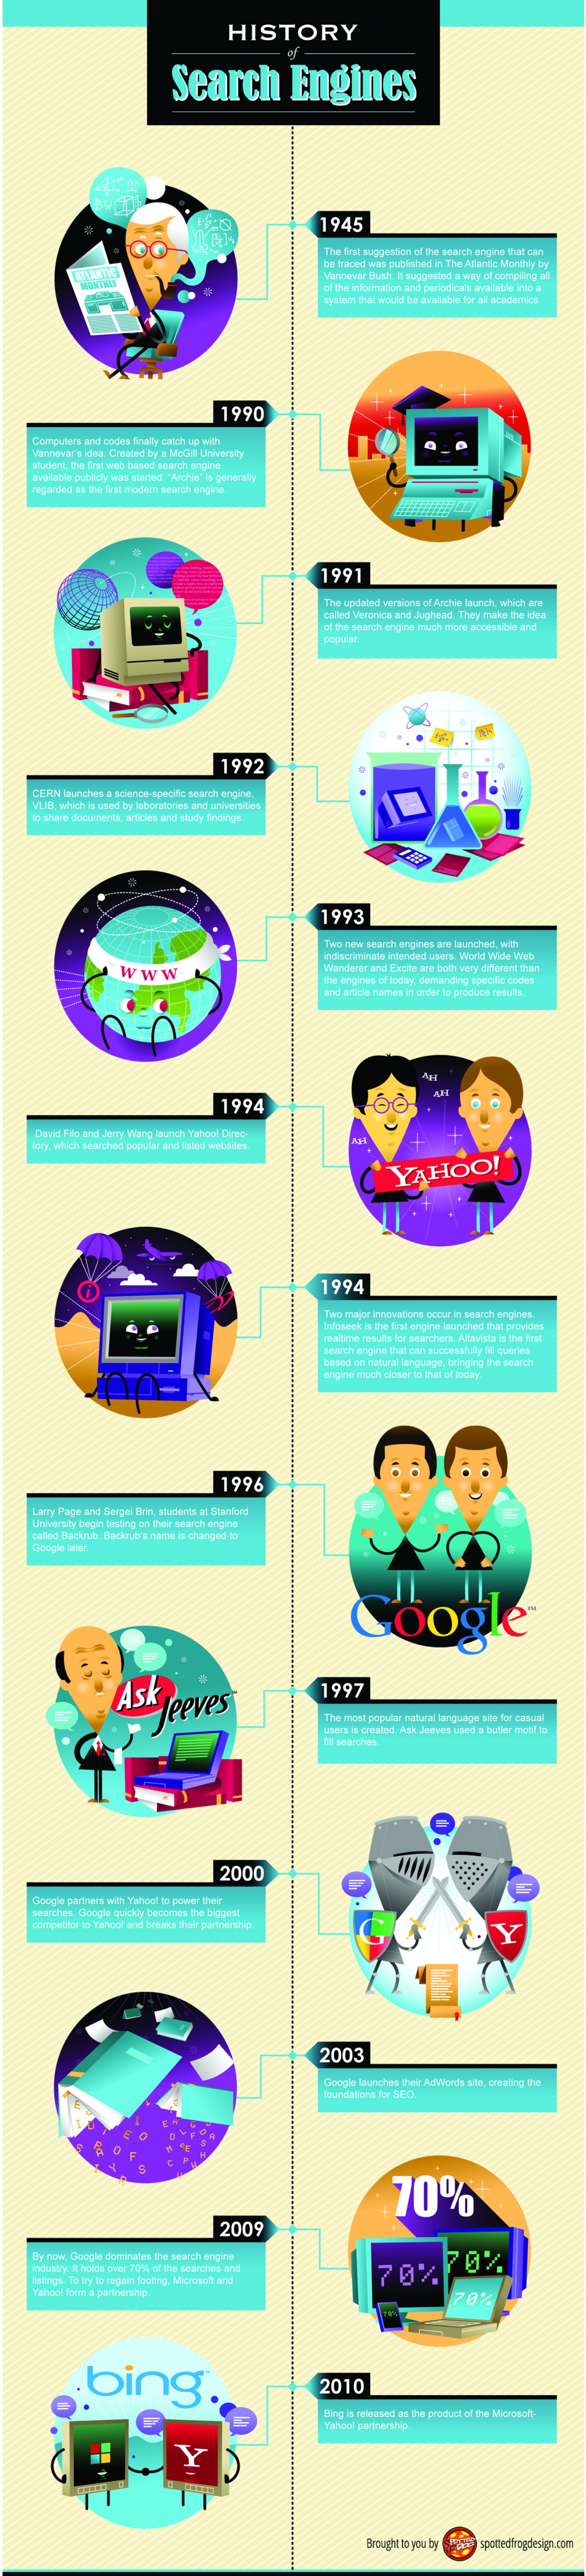 History of search engines